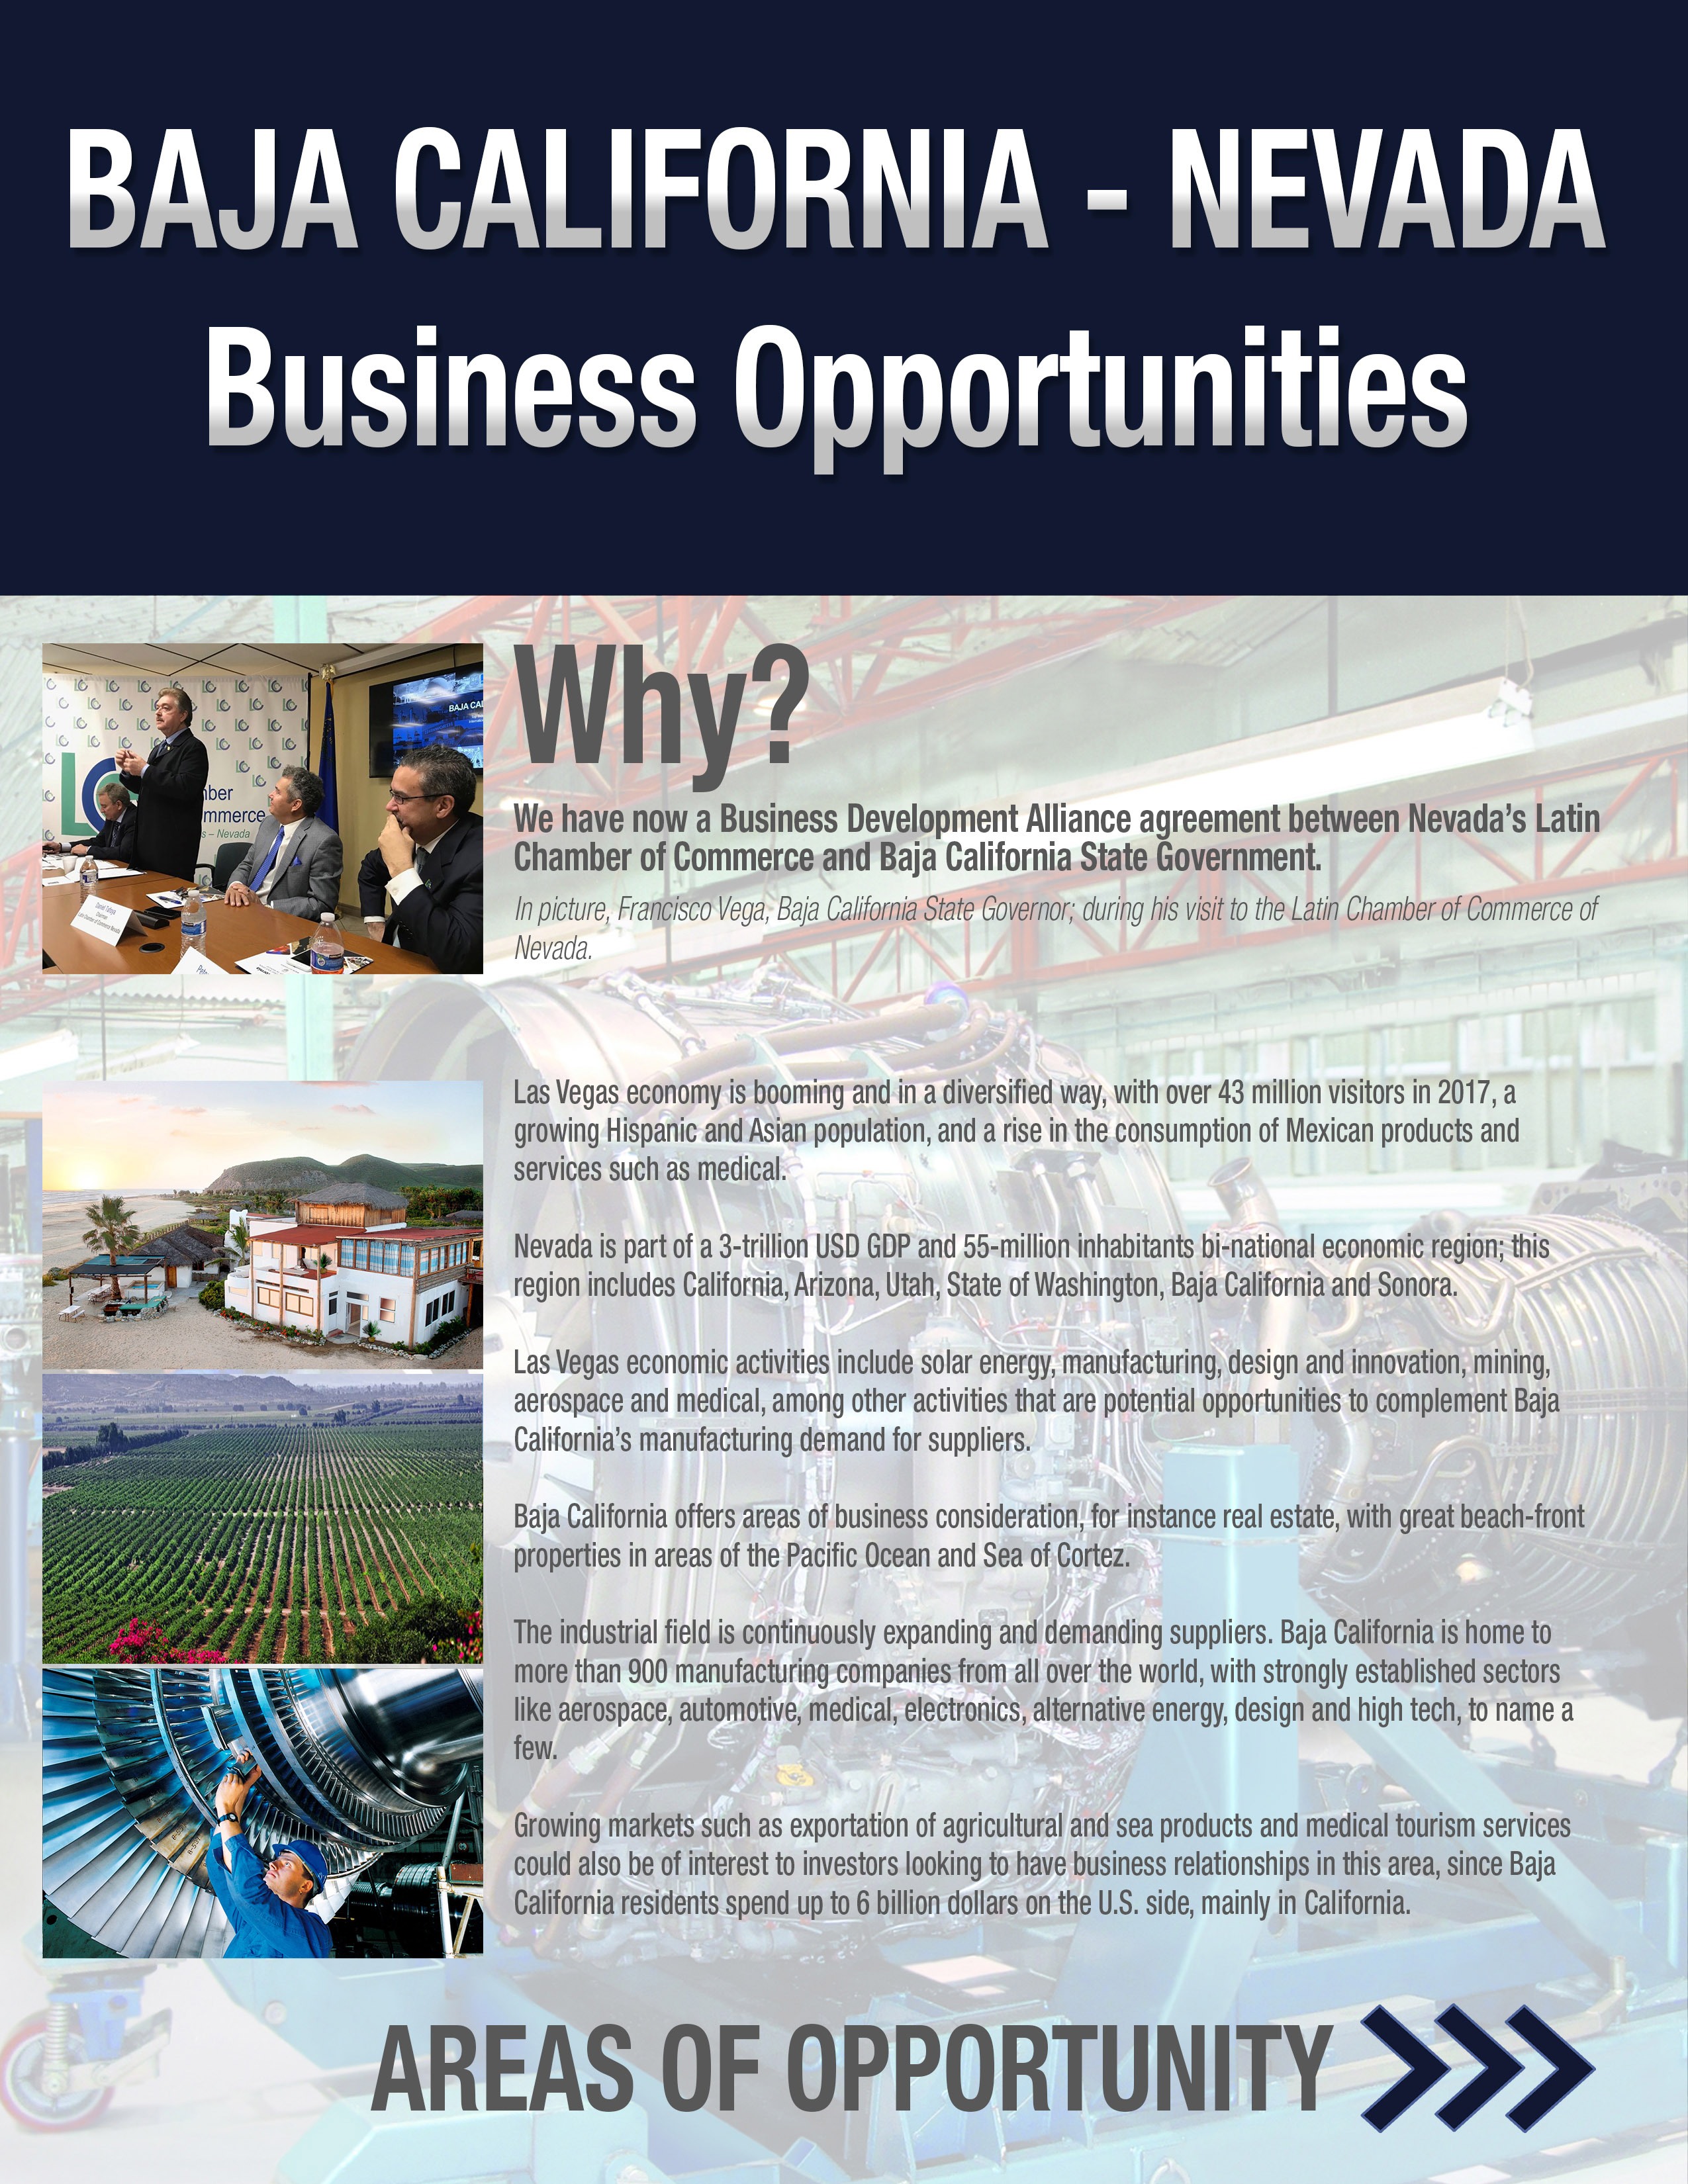 NHM-April2018-Baja California Nevada Business Opportunities page 1